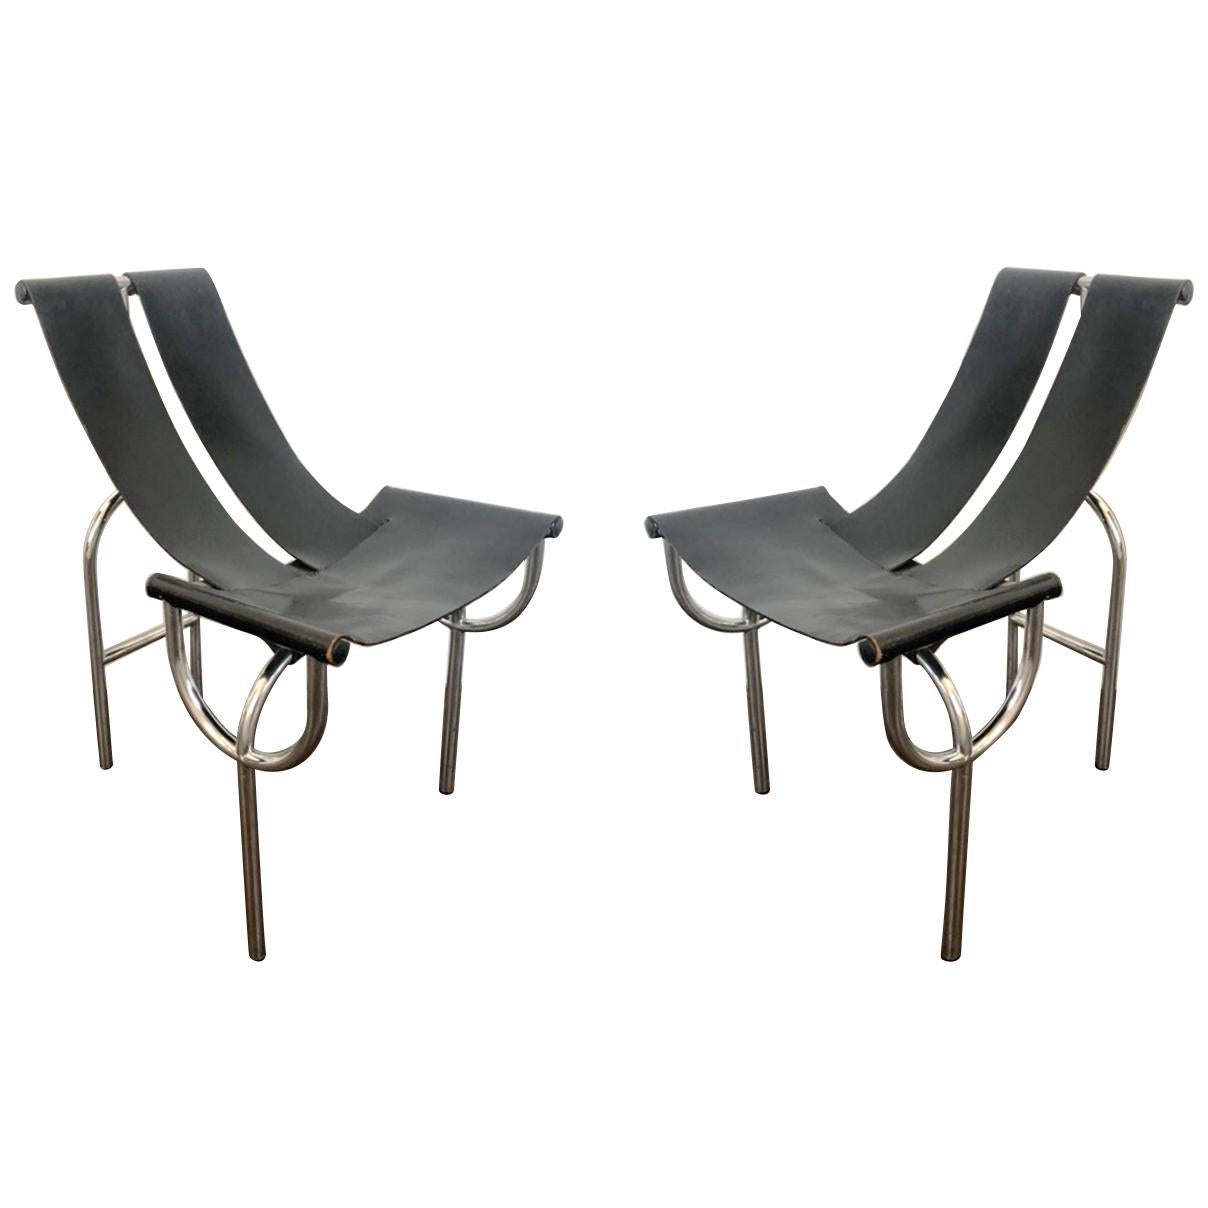 Pair of TRI 15 Chairs by Roberto Gabetti & AImaro Isola for Arbo, Italy, 1968